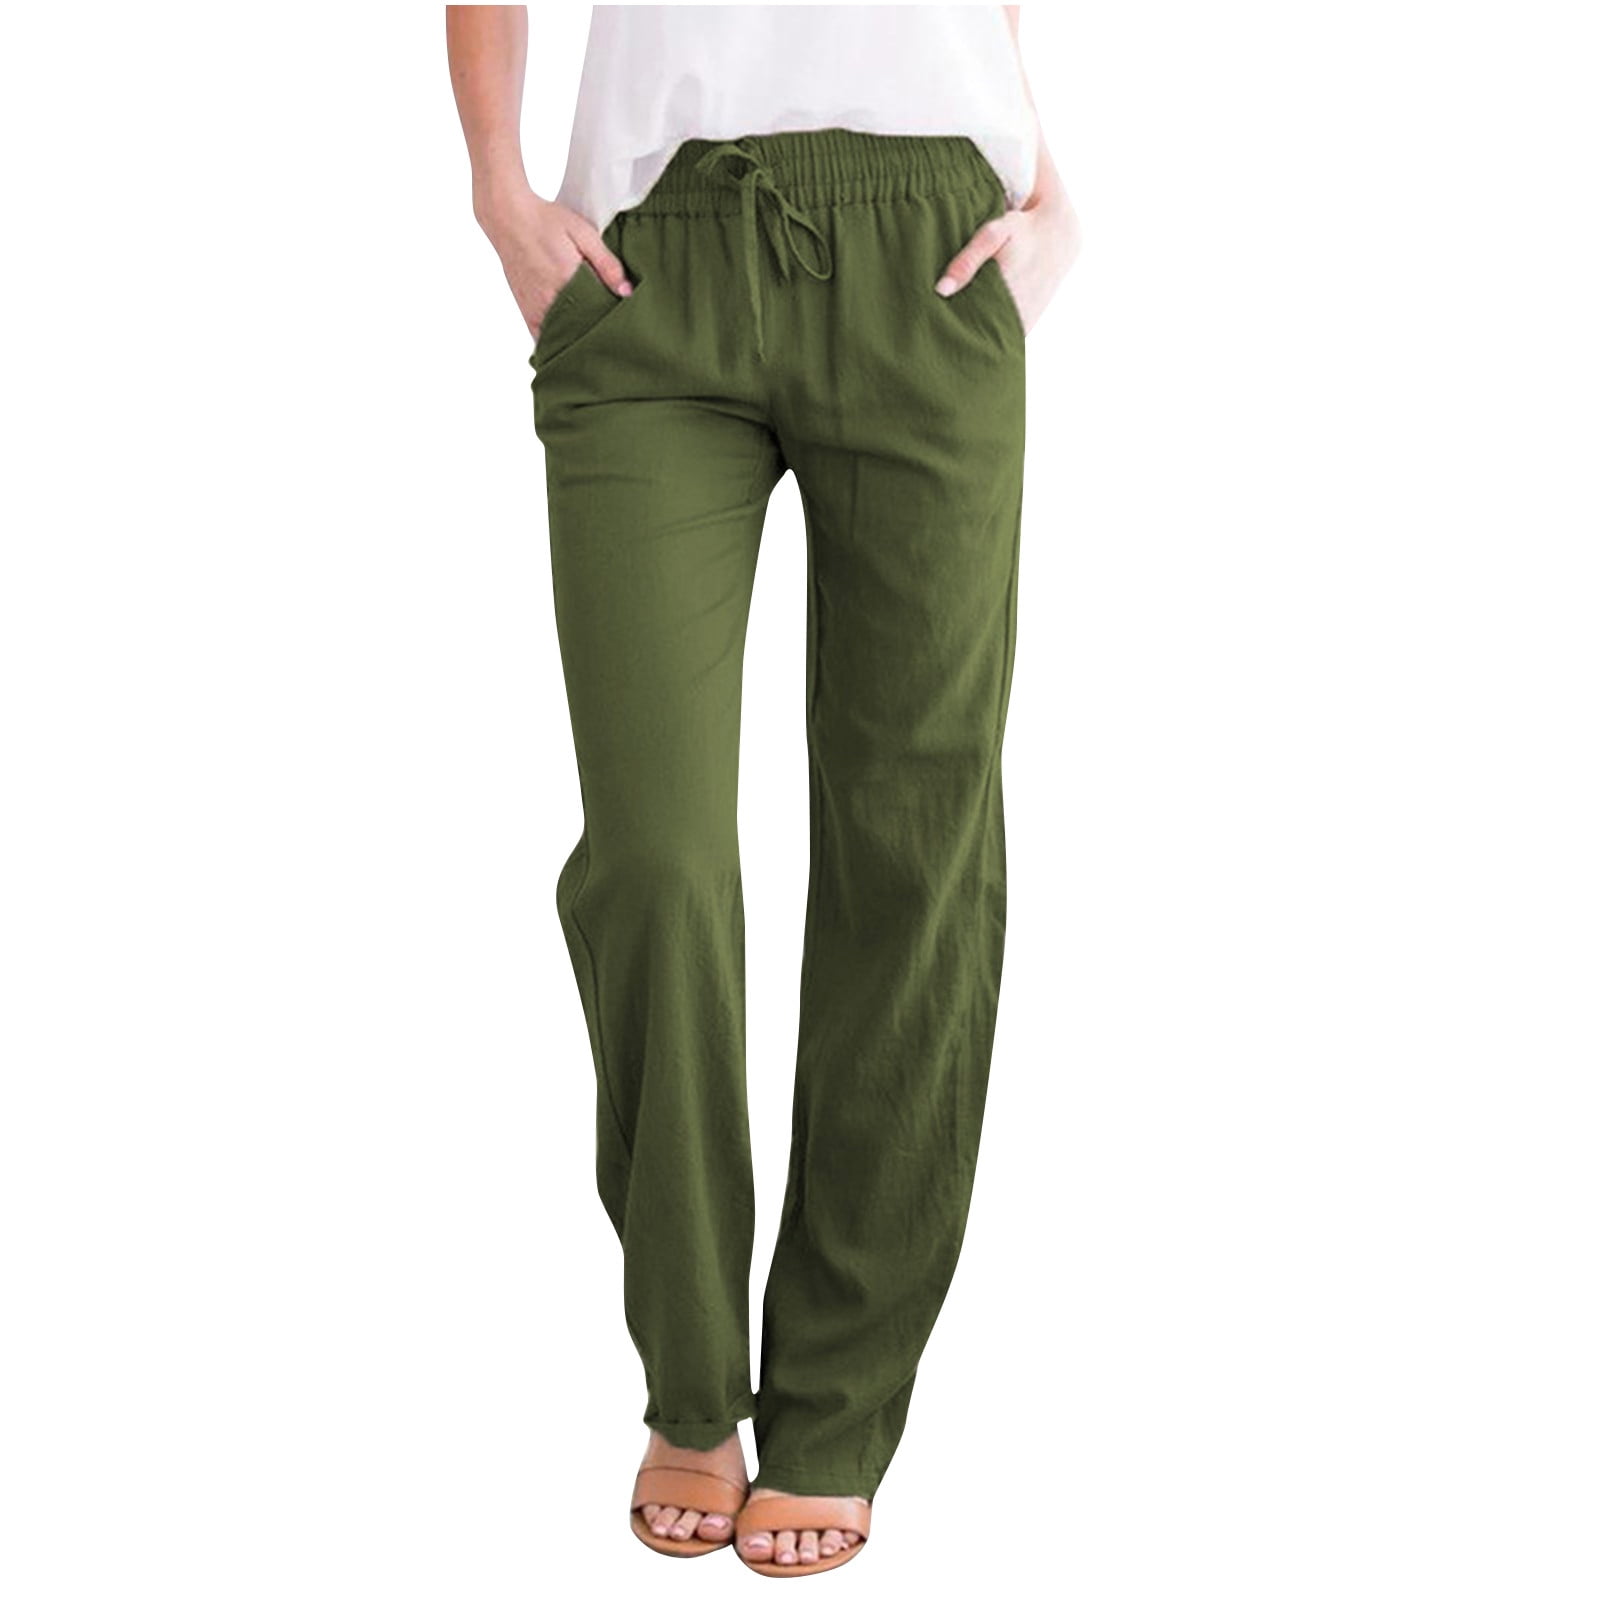 Blissclub Women Olive Move All Day Pants Regular with Adjustable Drawstring